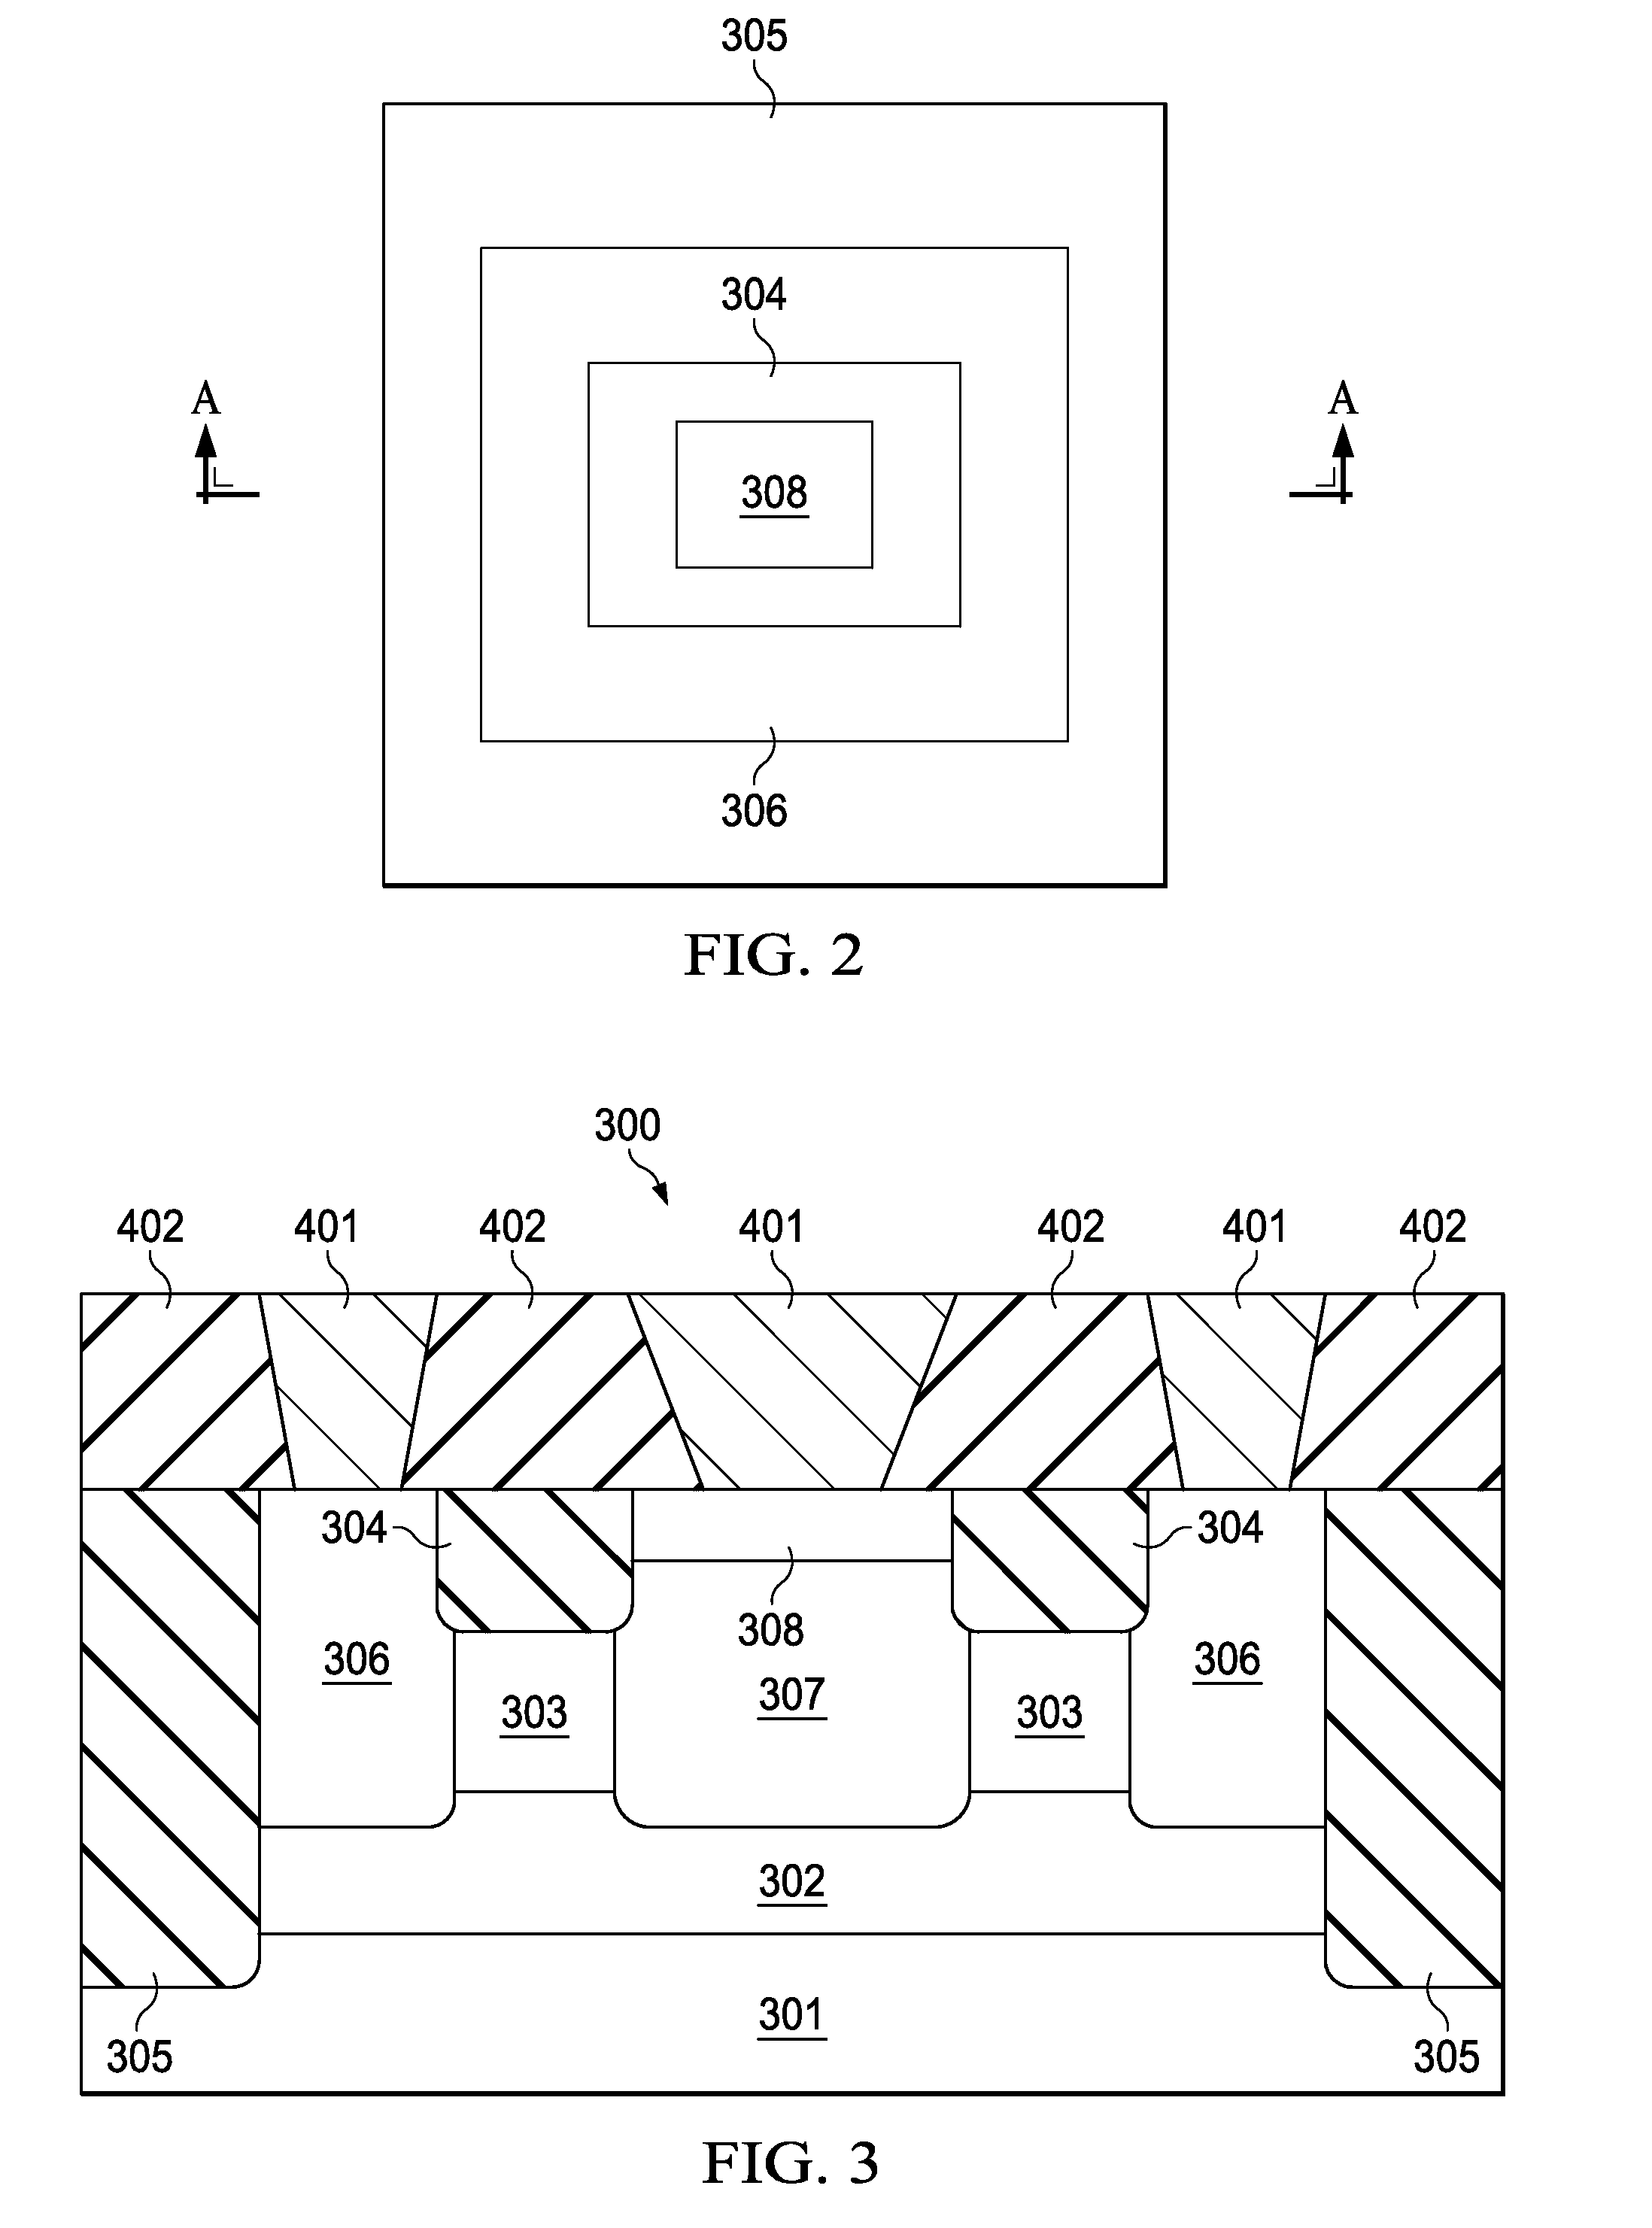 Integration of the silicon IMPATT diode in an analog technology